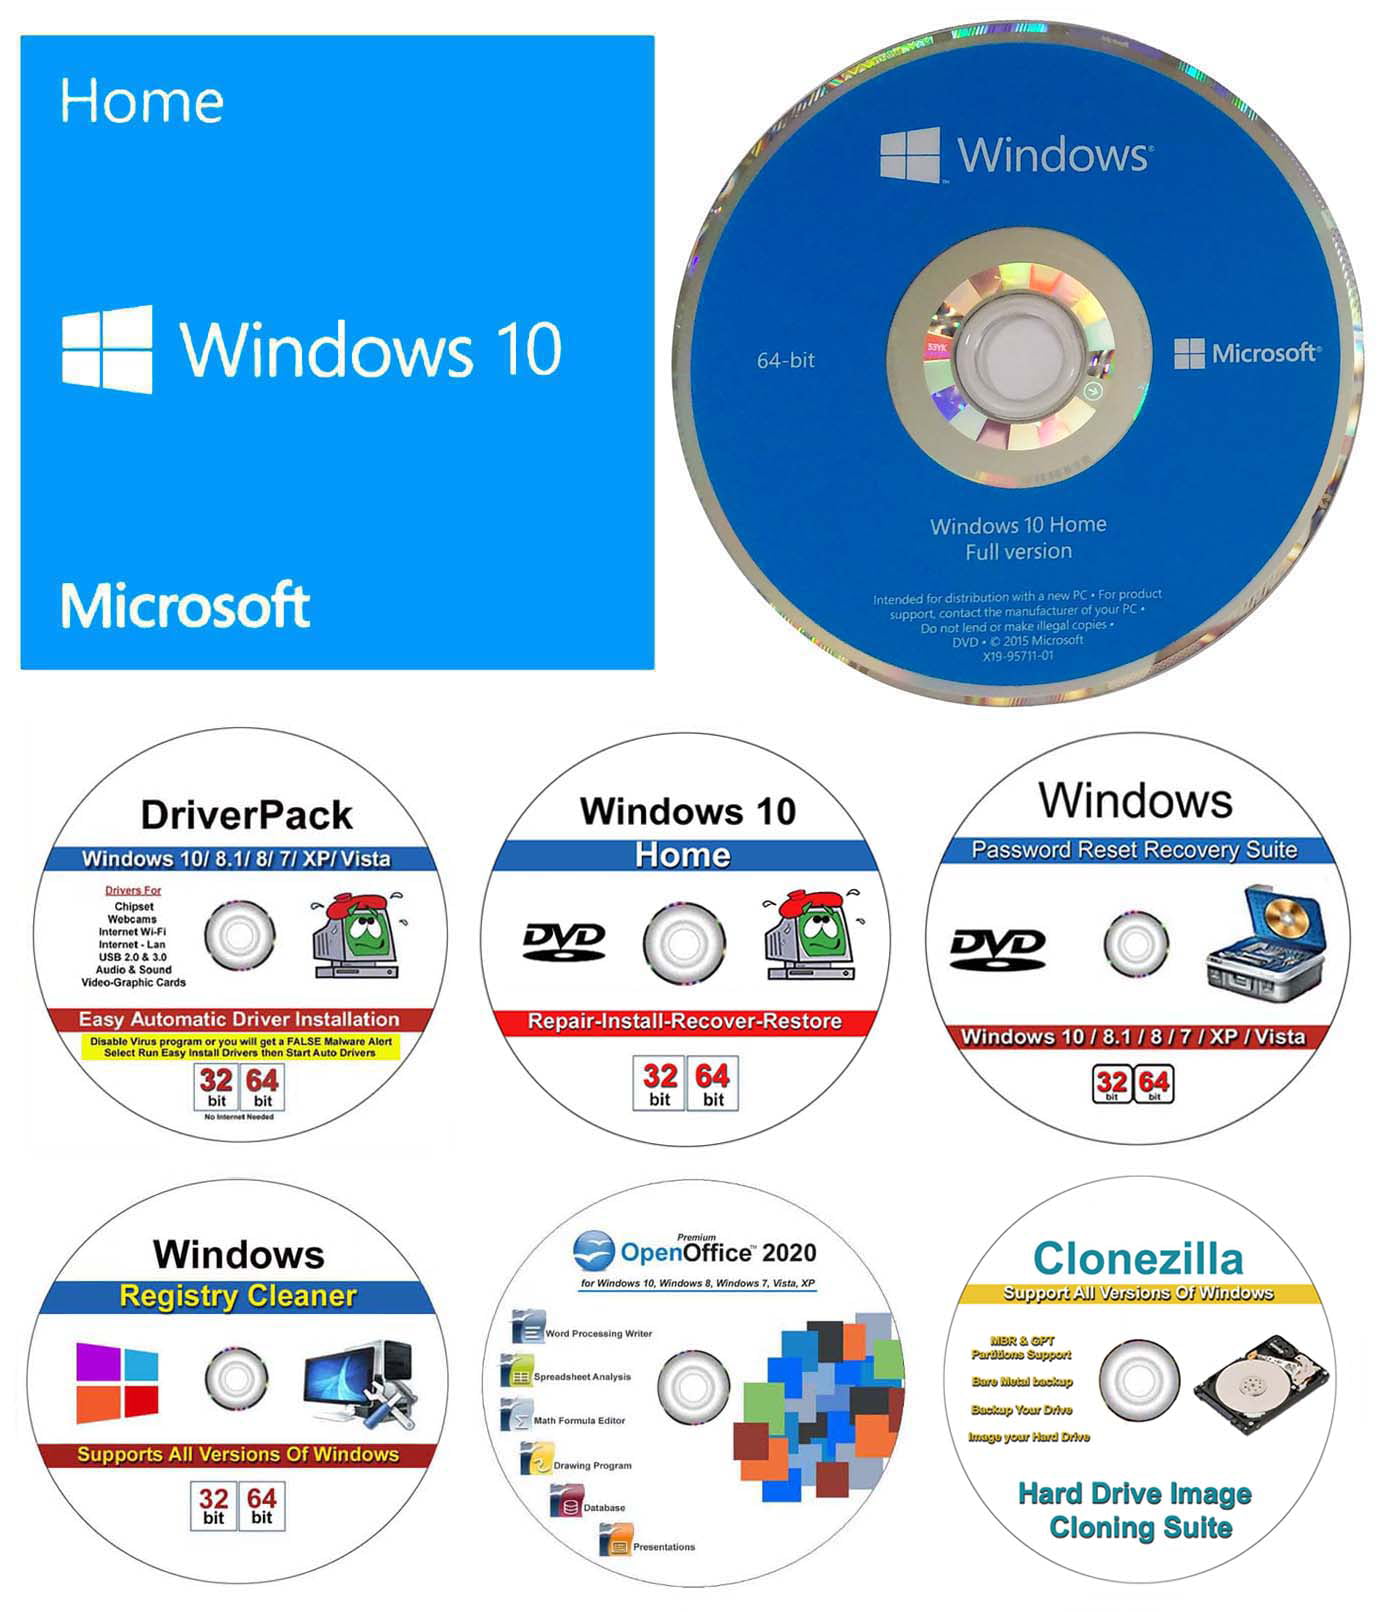 7-1 Bundle Microsoft OEM Windows 10 Home 64 bit & Windows 10 Home Install Repair restore & Recover DVD, Open Office 2020, Password Recovery, Registry Cleaner, Drivers Pack and Clonezilla Software